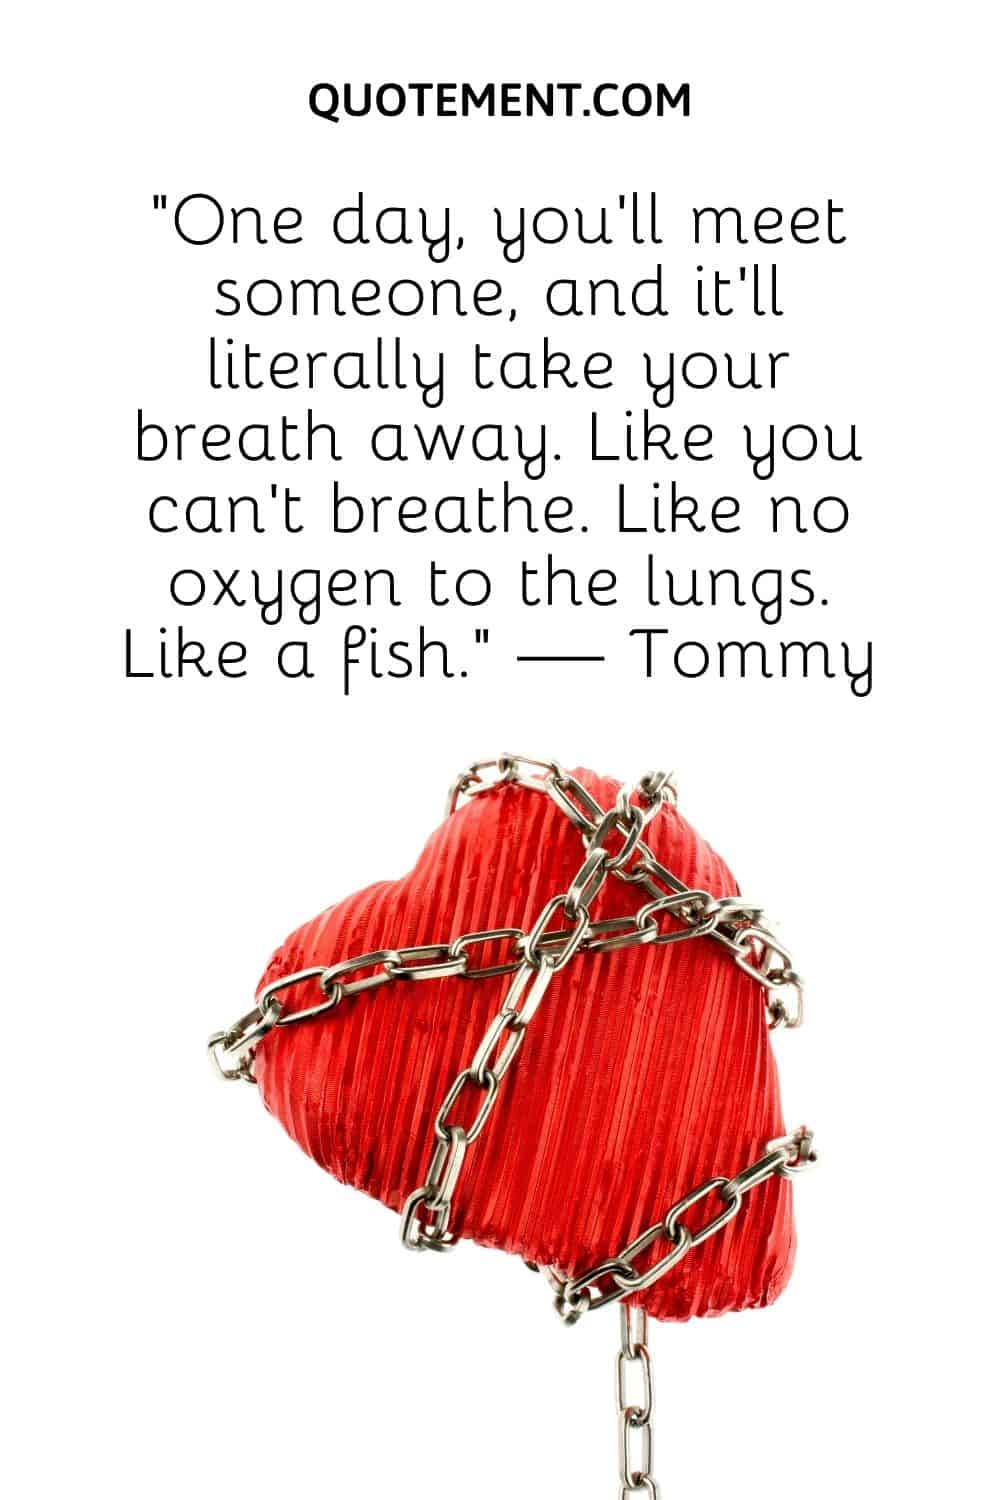 “One day, you’ll meet someone, and it’ll literally take your breath away. Like you can’t breathe. Like no oxygen to the lungs. Like a fish.” — Tommy